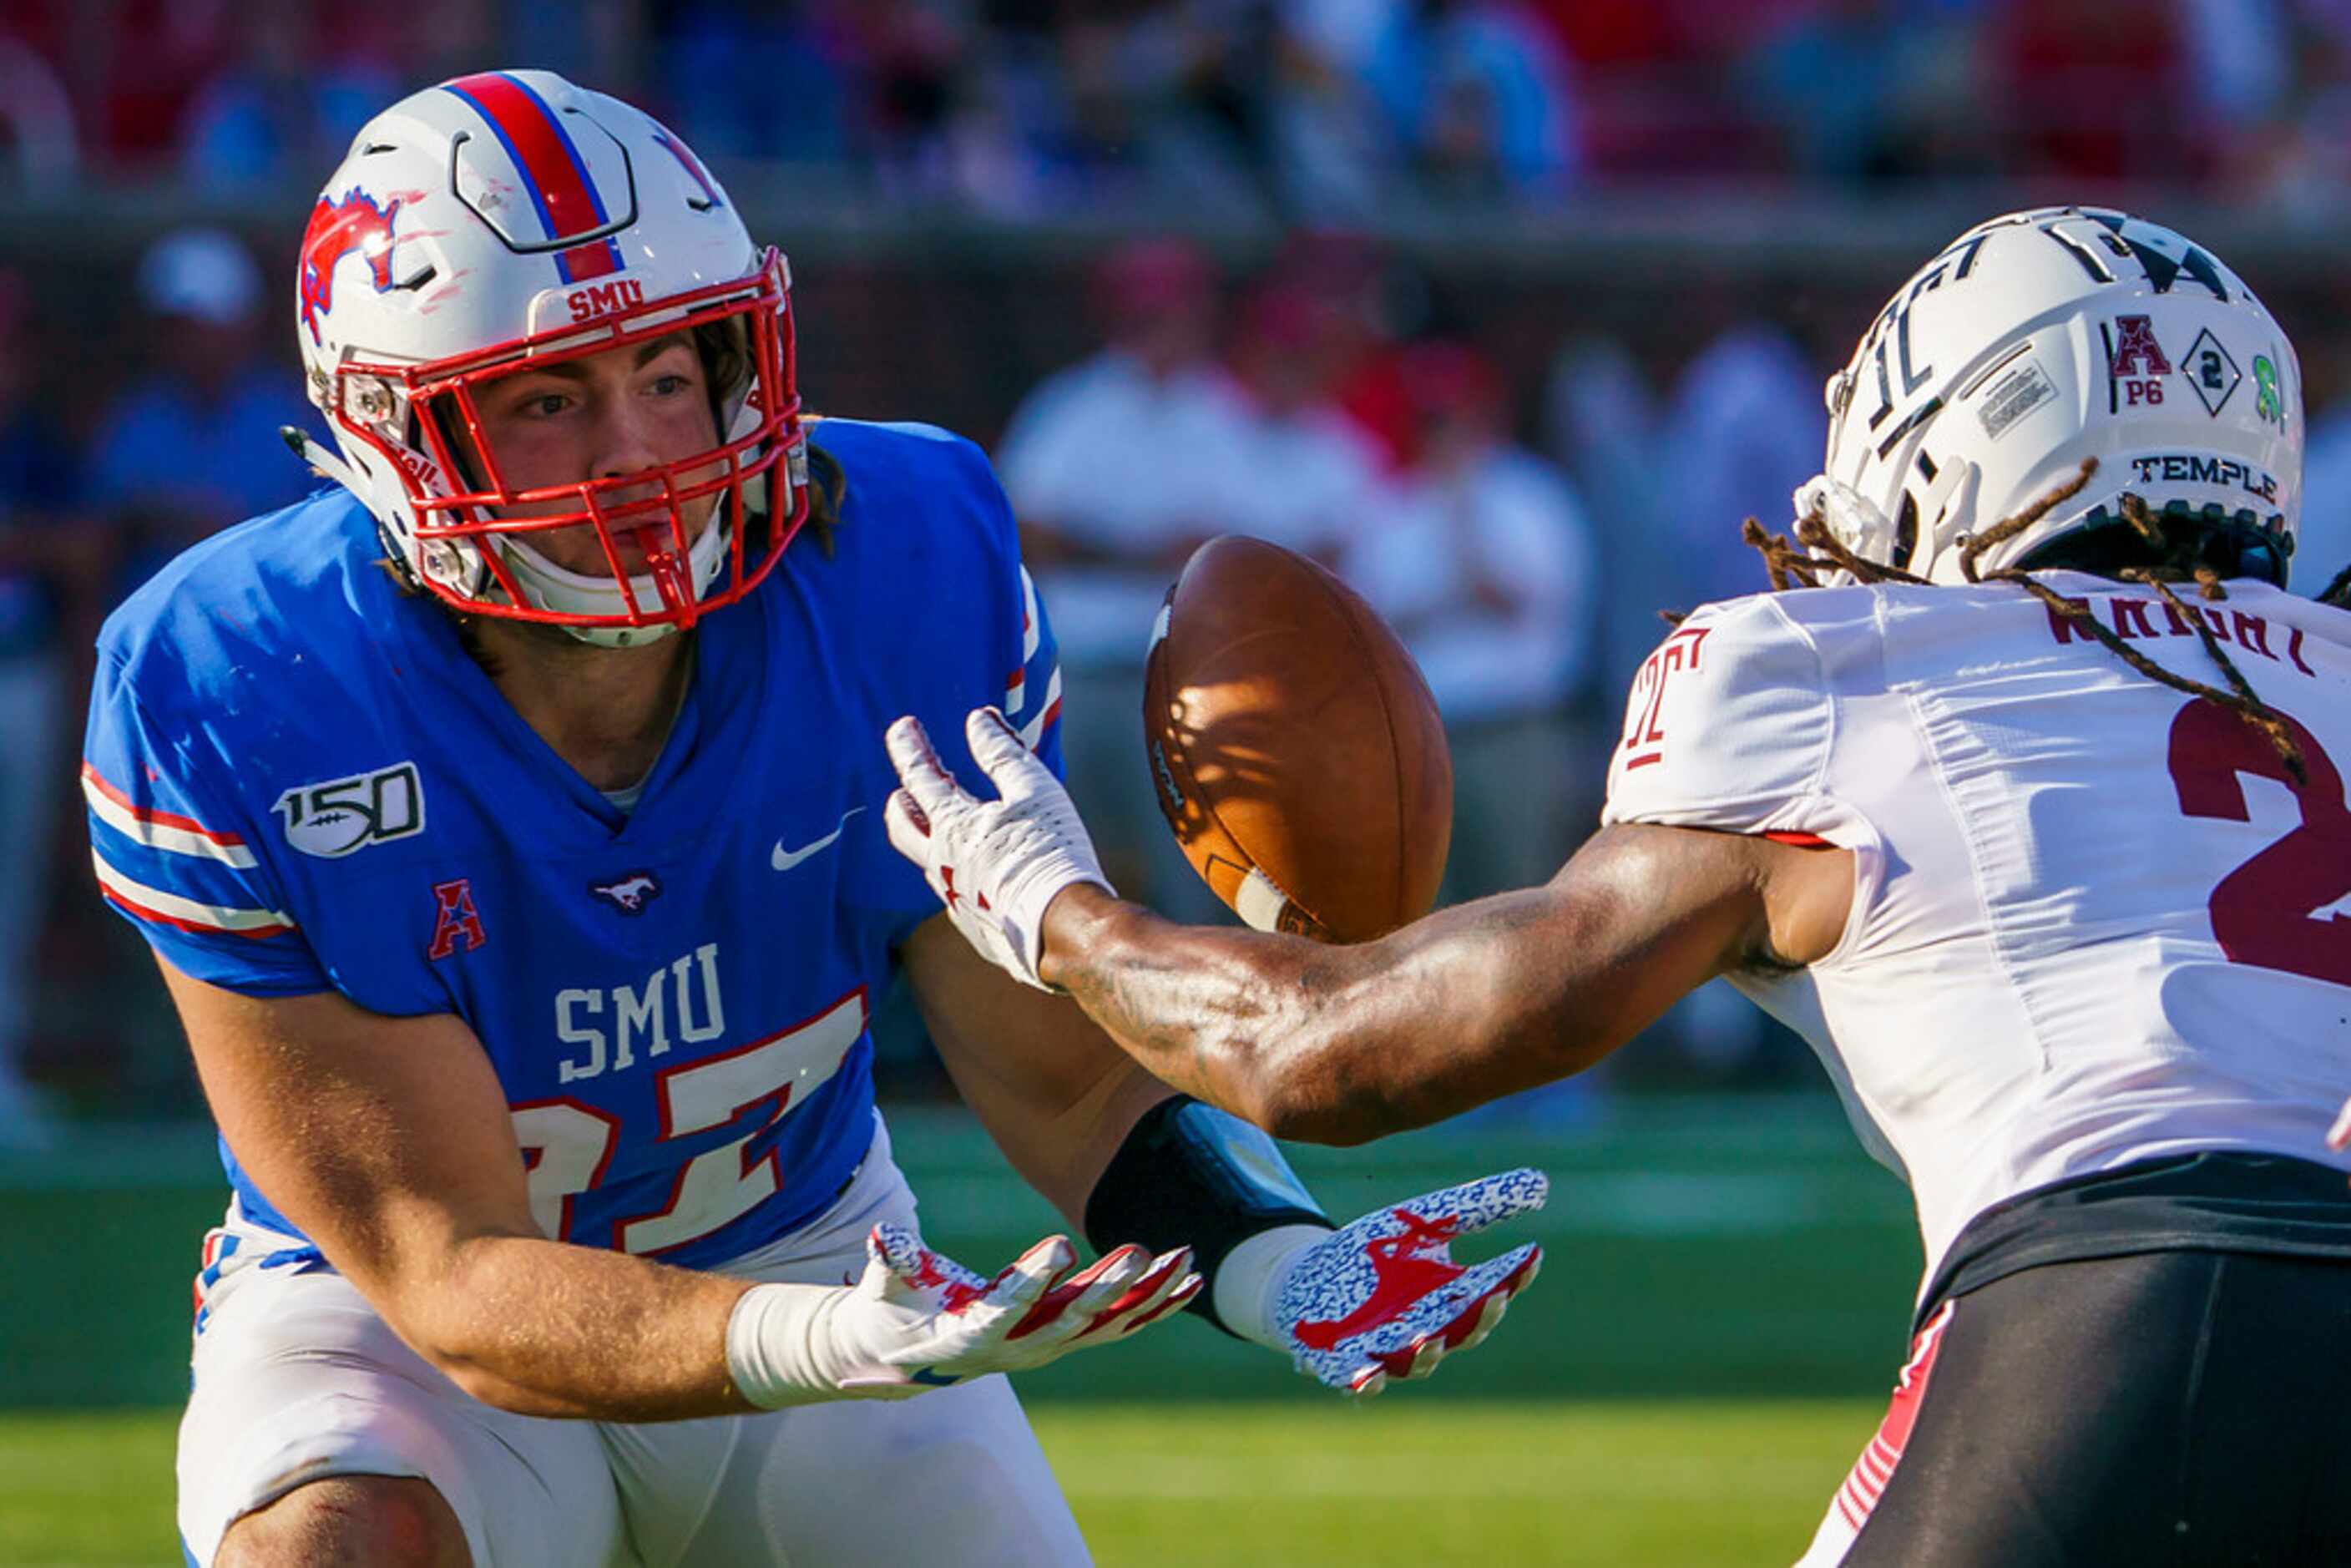 SMU safety Michael Salerno (27) reaches for a fumble by Temple wide receiver Isaiah Wright...